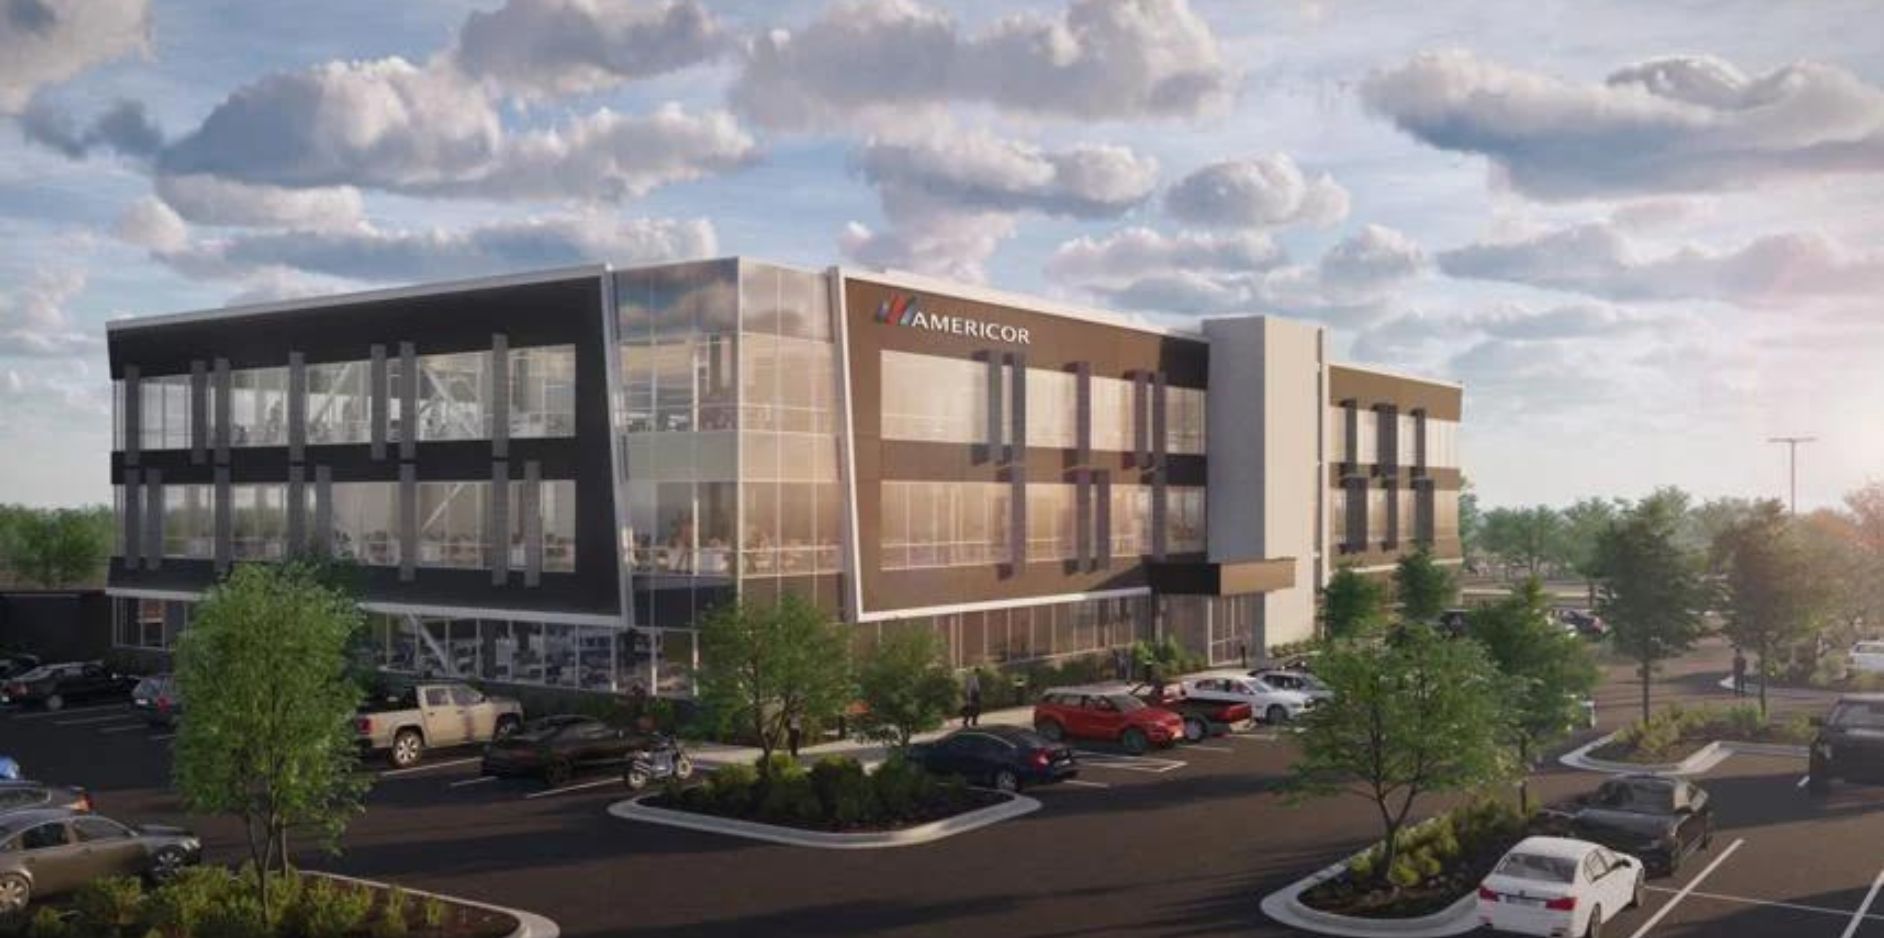 Americor Plans for New Building, up to 800 Jobs in Meridian